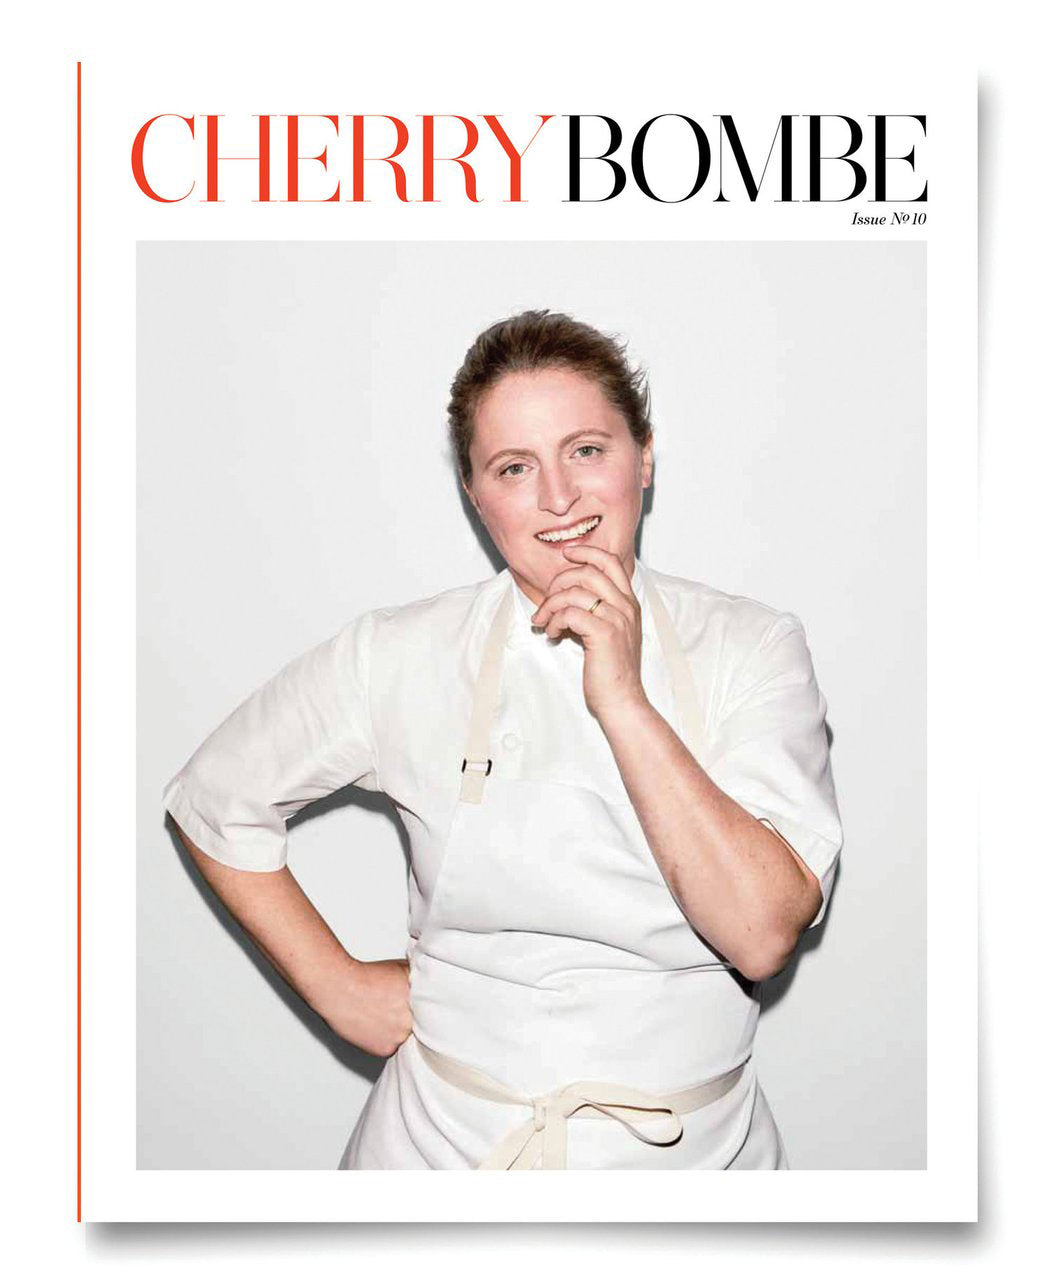 Issue No. 10: Yes, Chef